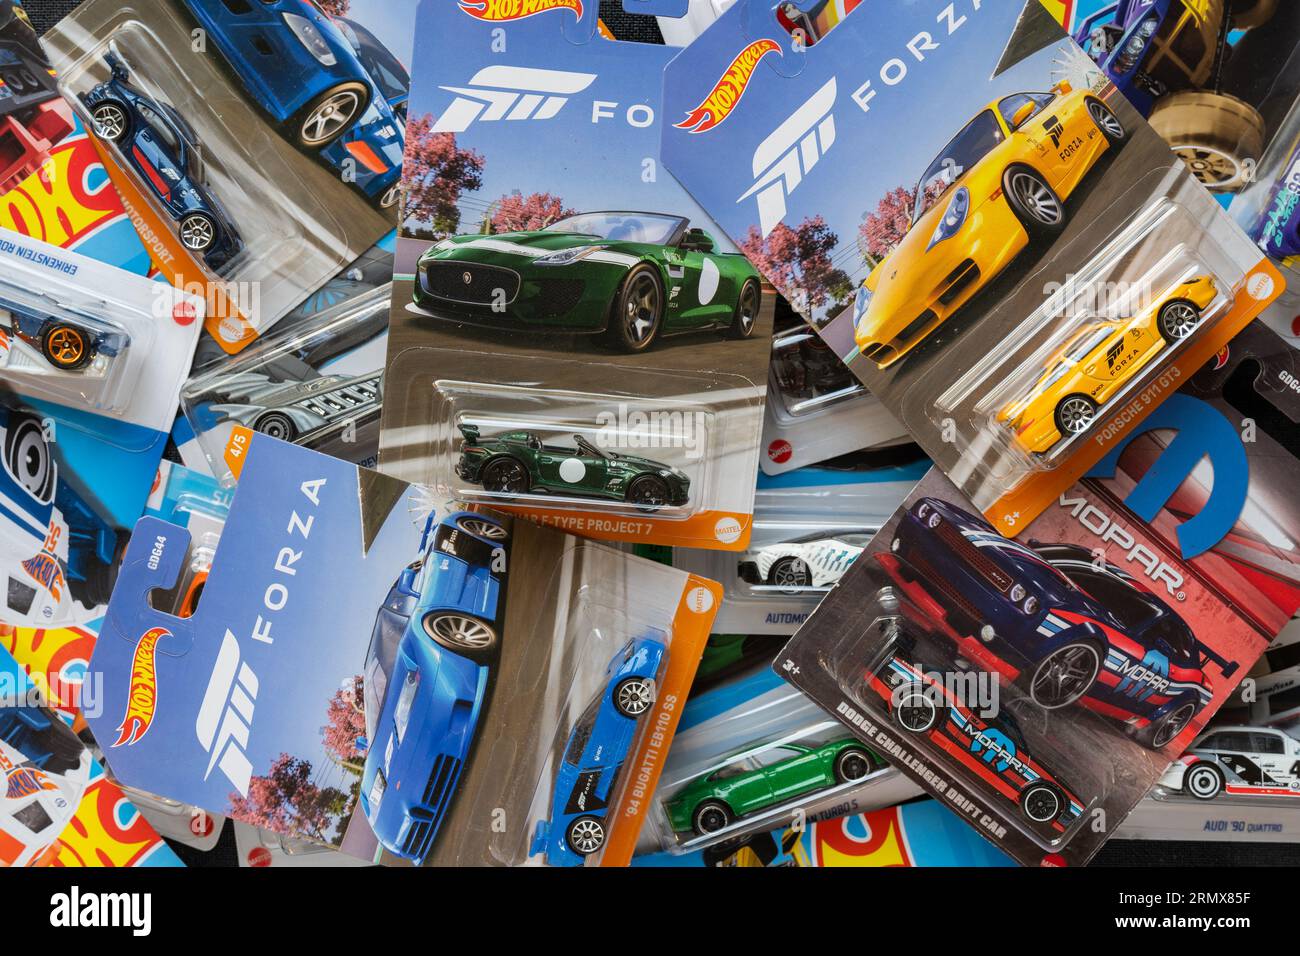 Doha, Qatar - August 17, 2023: Assortment of Hot Wheels die cast carded car model for Hot Wheels series. Hot Wheels is a scale die-cast toy cars by Am Stock Photo